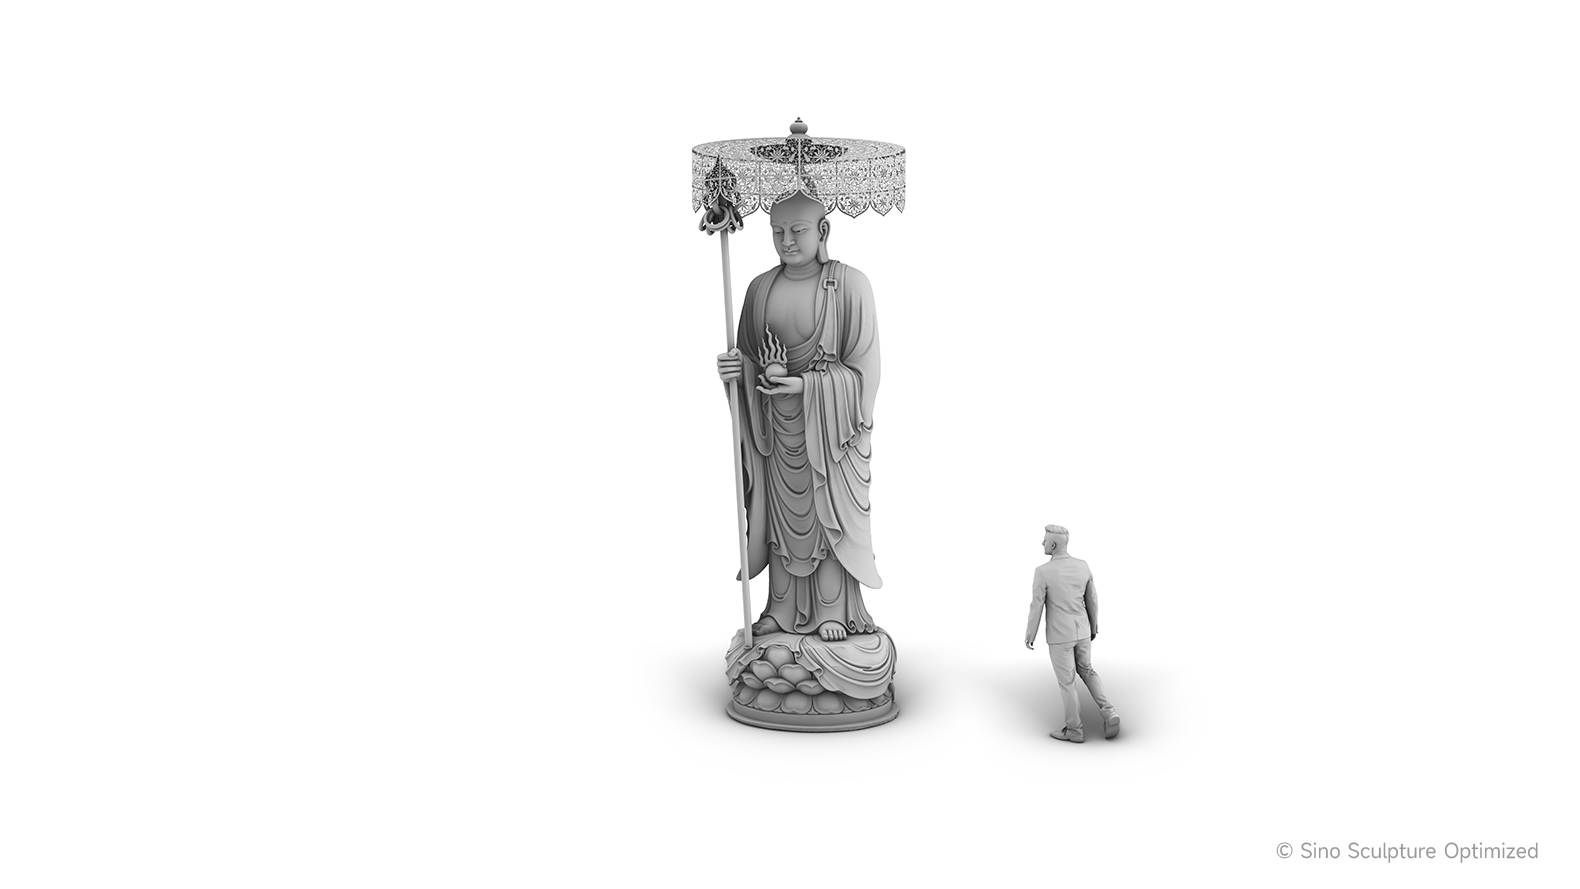 The 3D model of the large bronze casting Ksitigarbha Statue